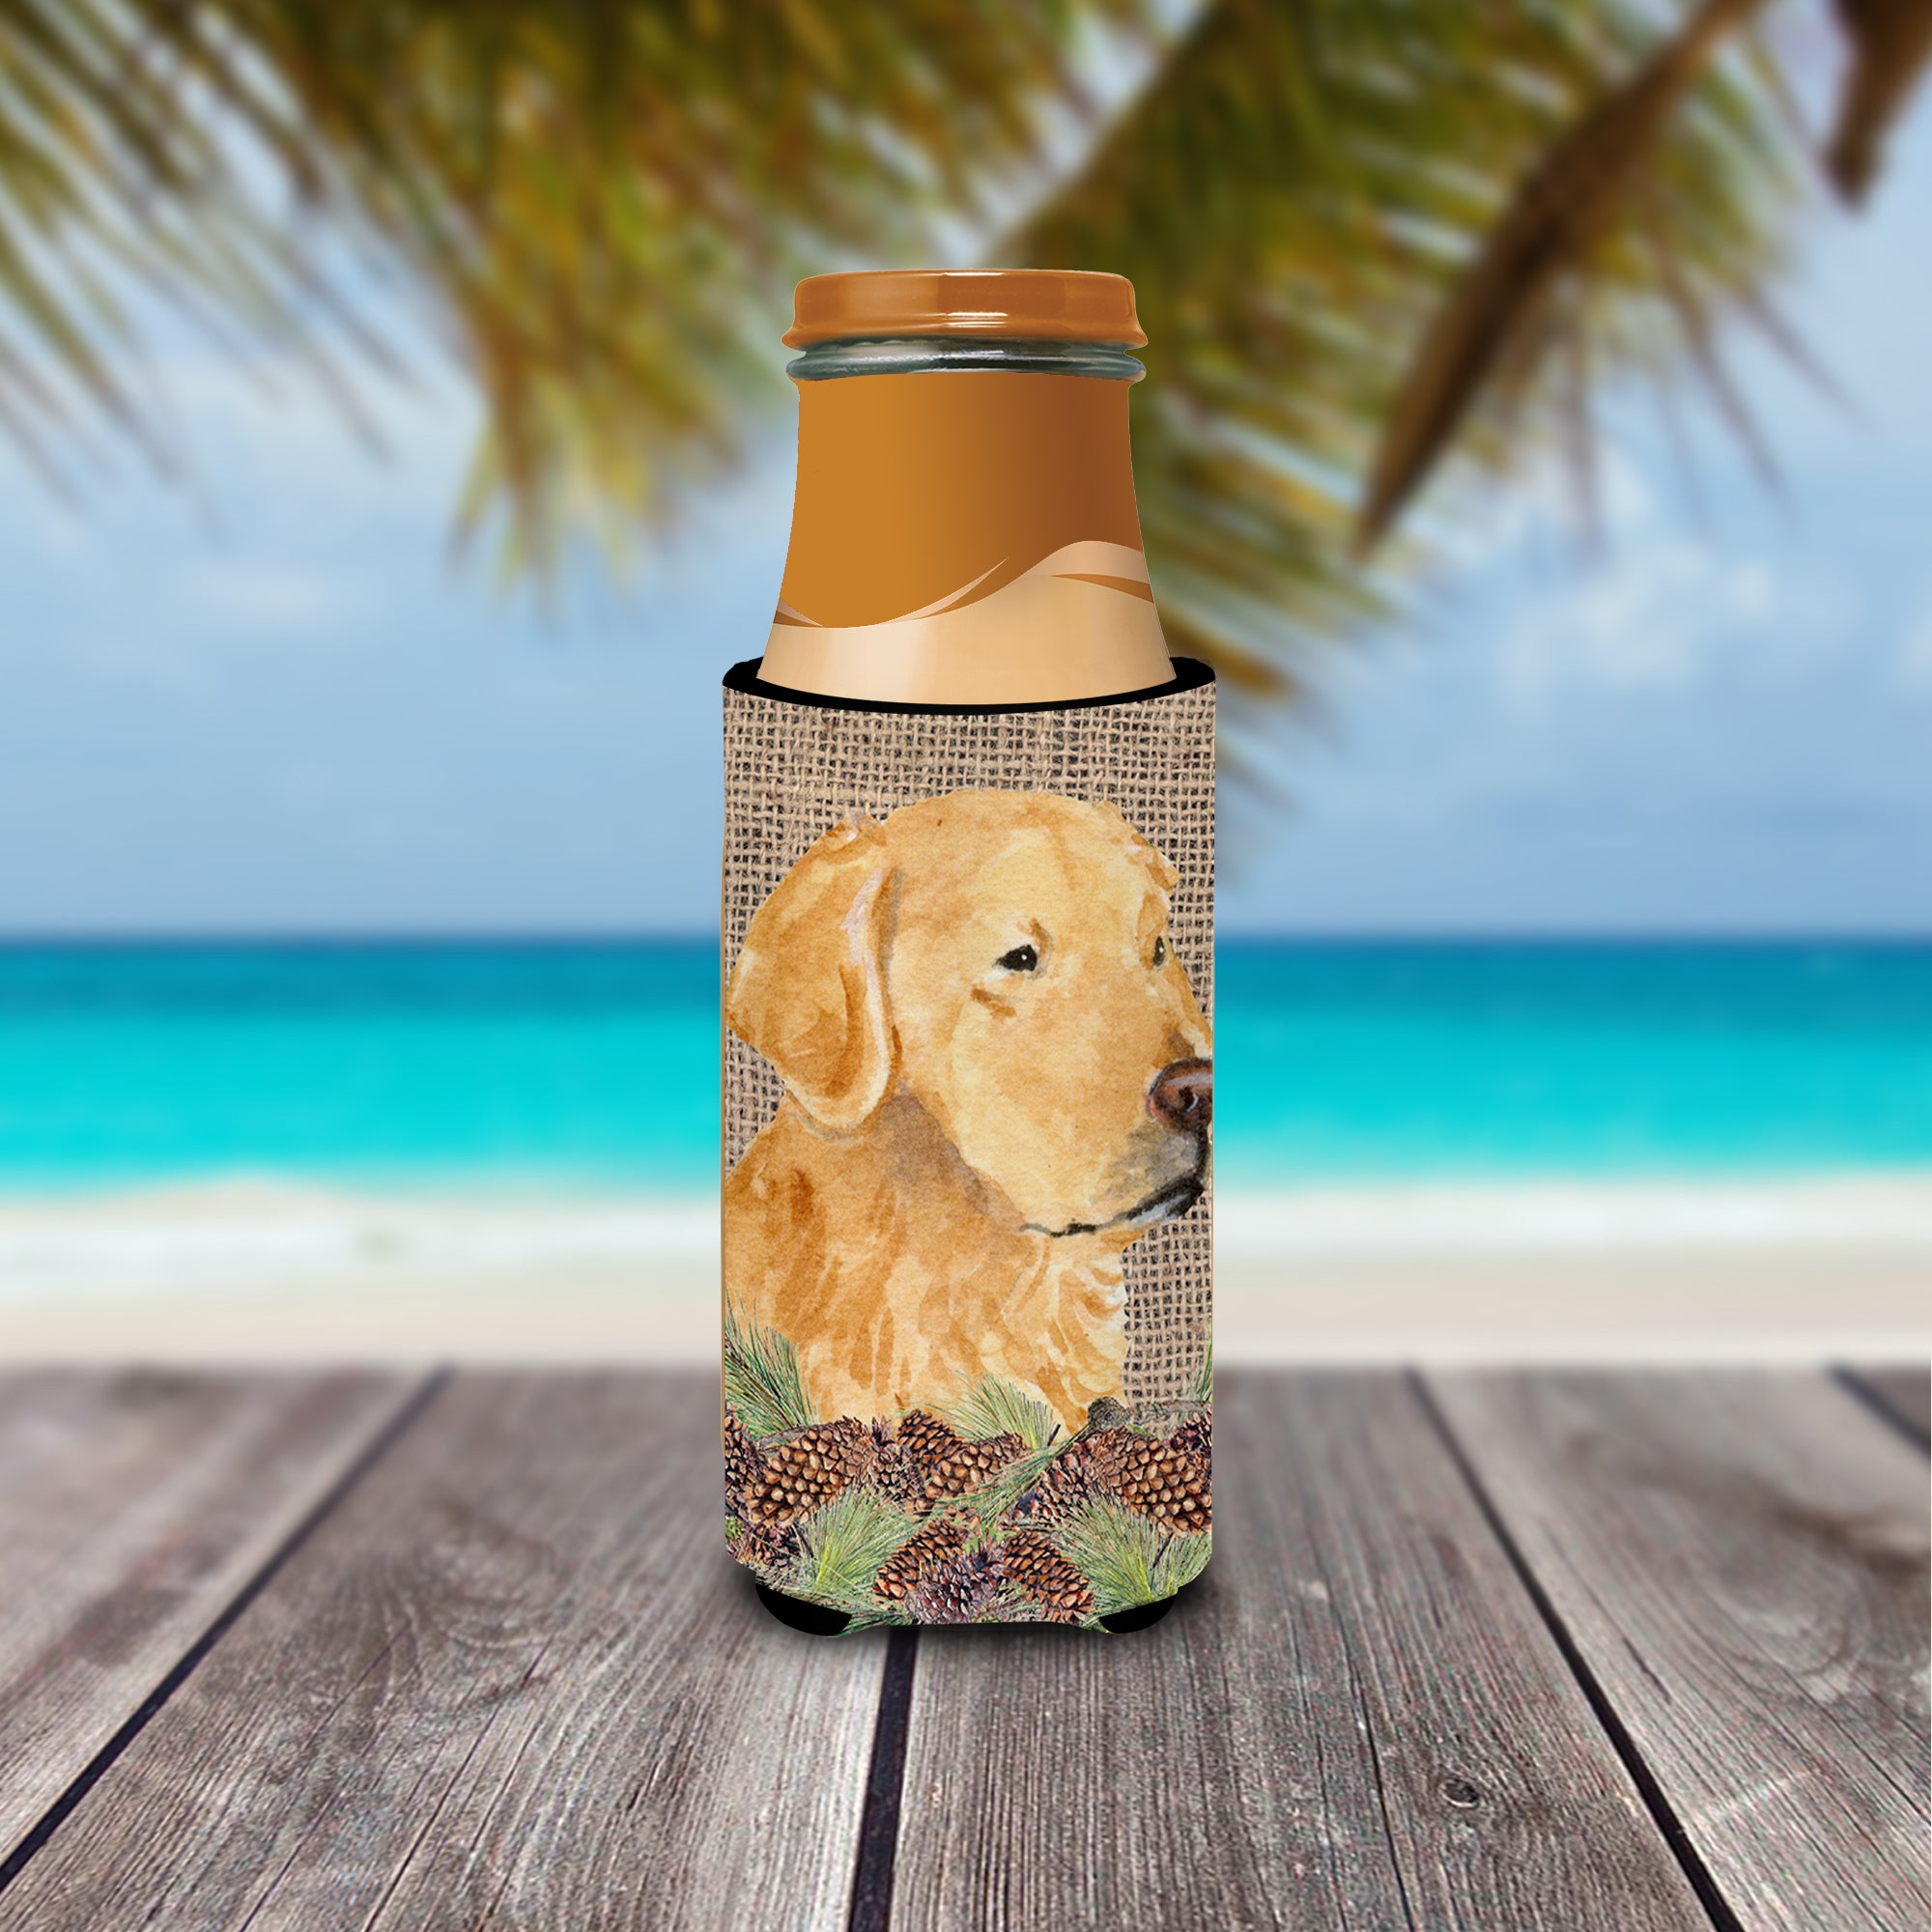 Golden Retriever on Faux Burlap with Pine Cones Ultra Beverage Insulators for slim cans SS4067MUK.